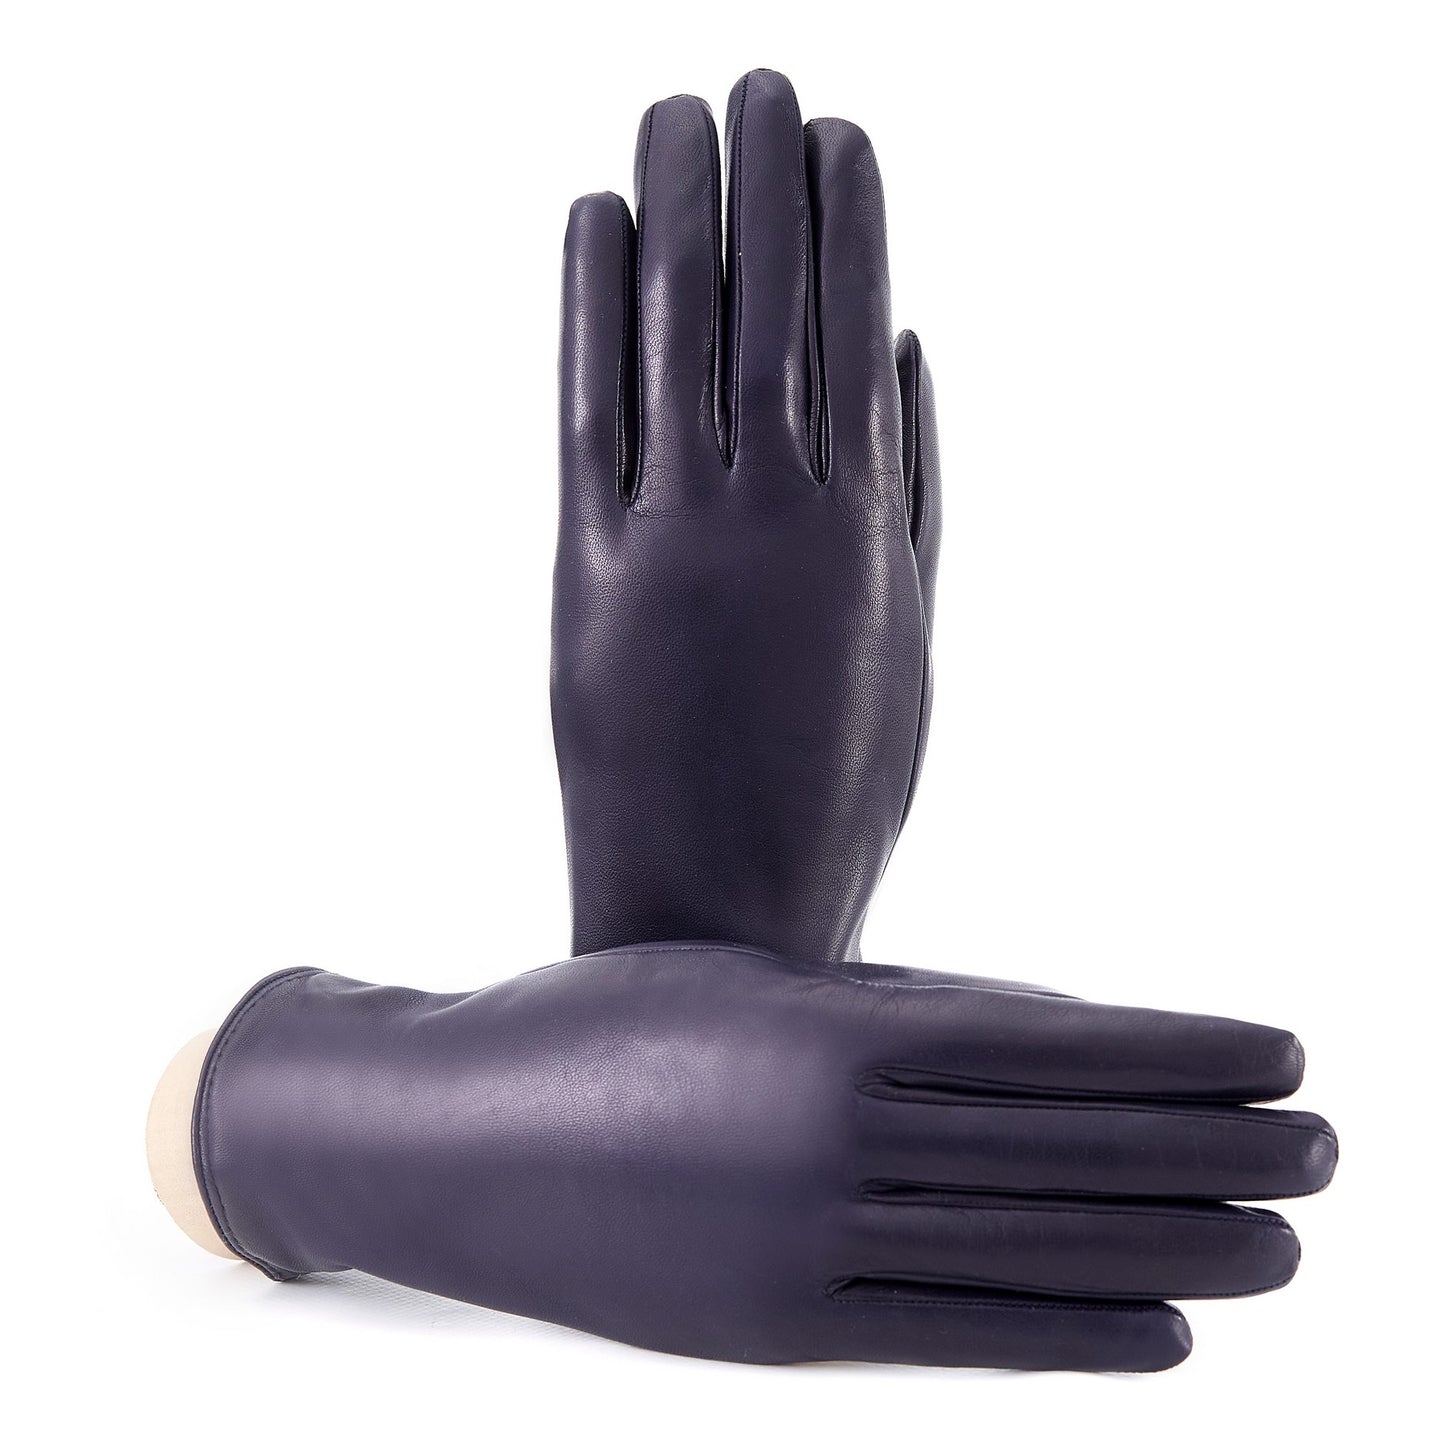 Women’s basic blue soft nappa leather gloves with palm opening and mix cashmere lining